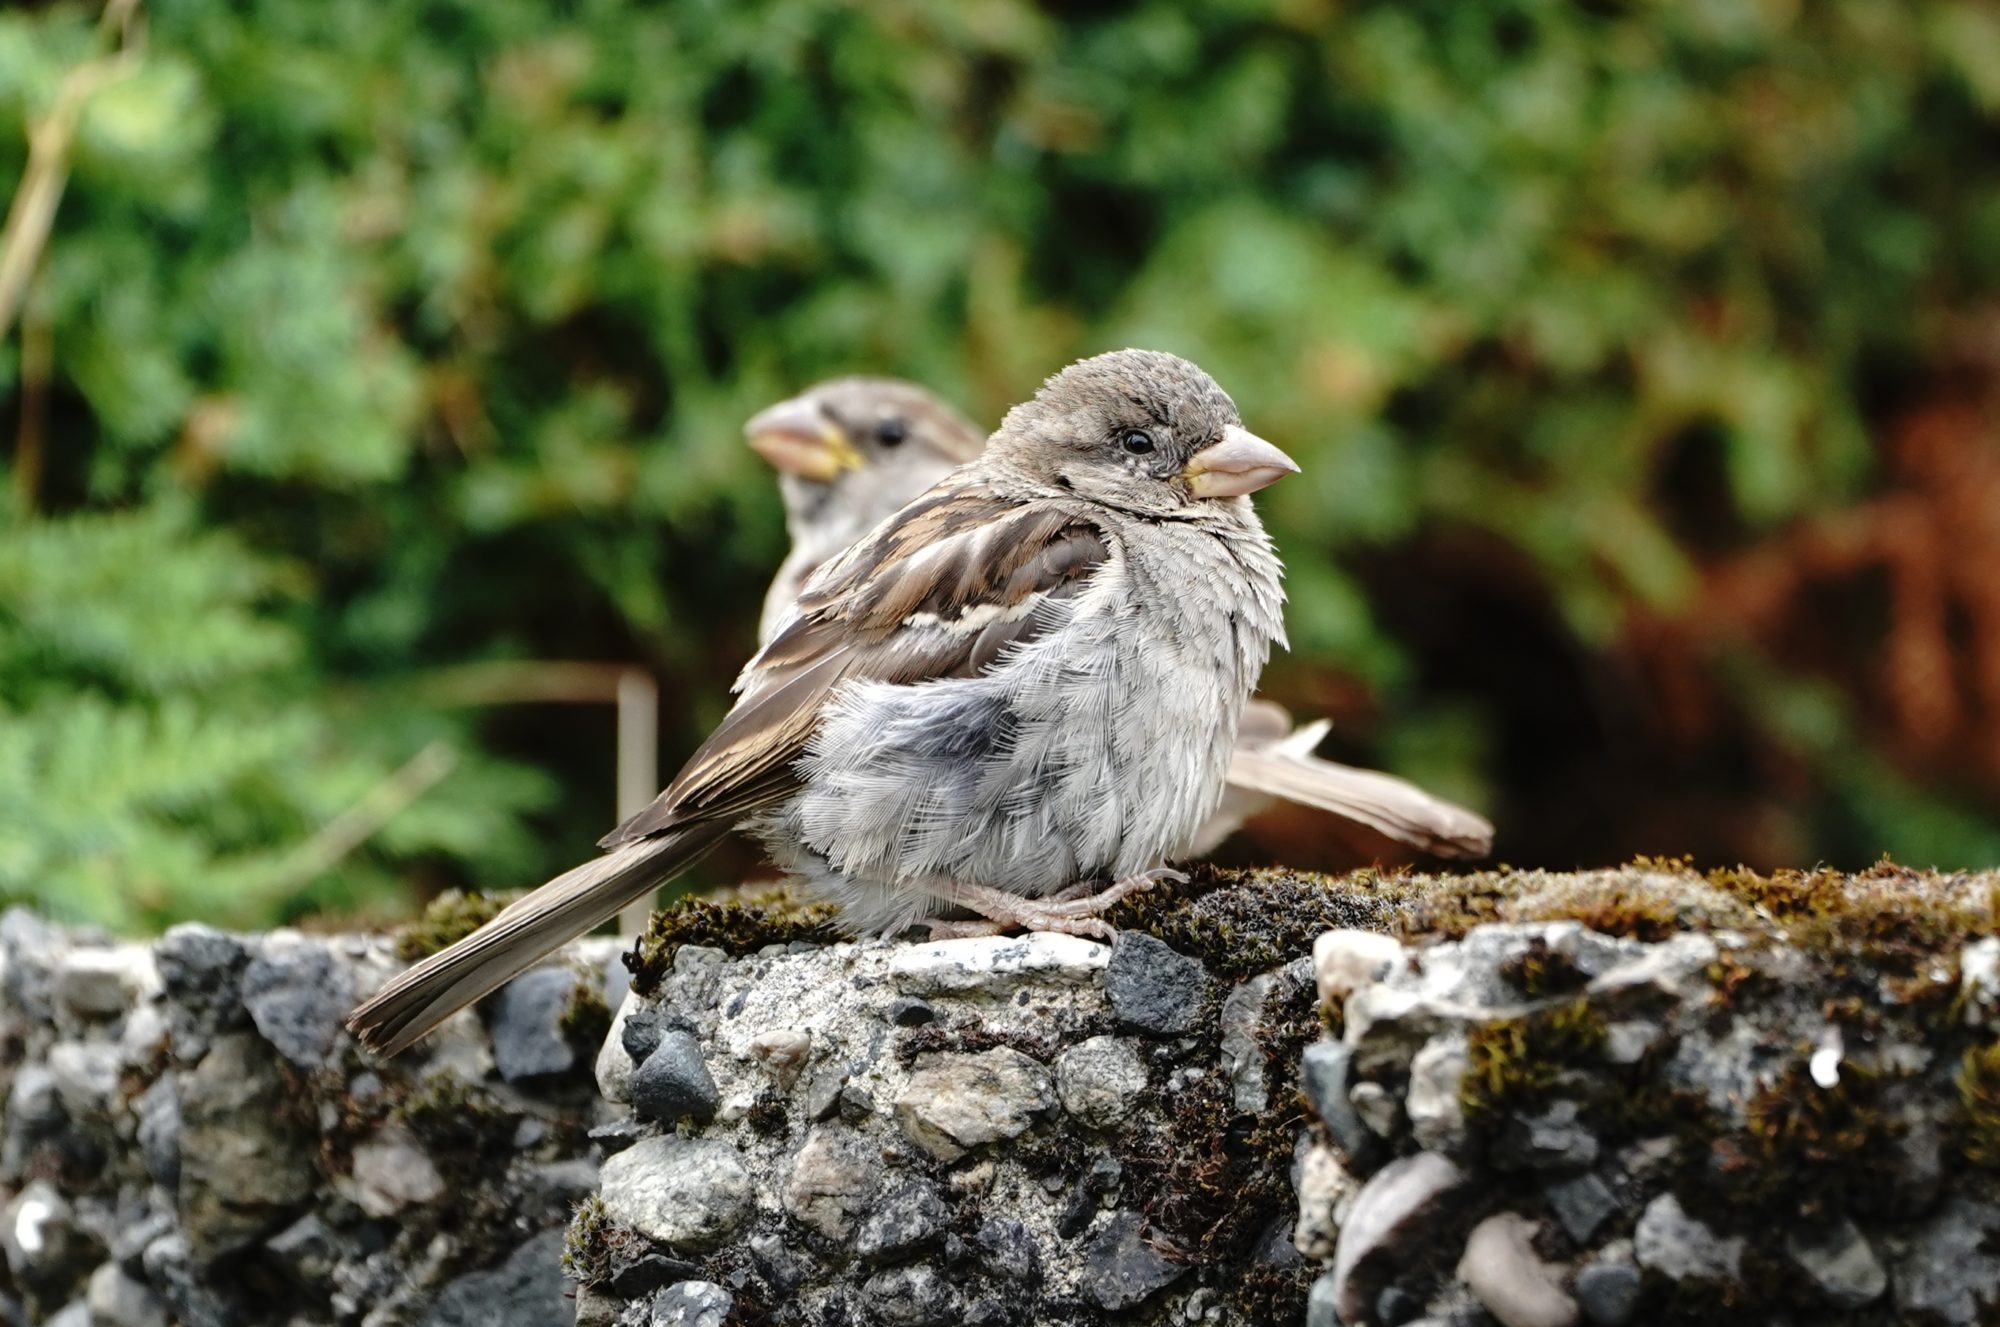 Two immature House Sparrows